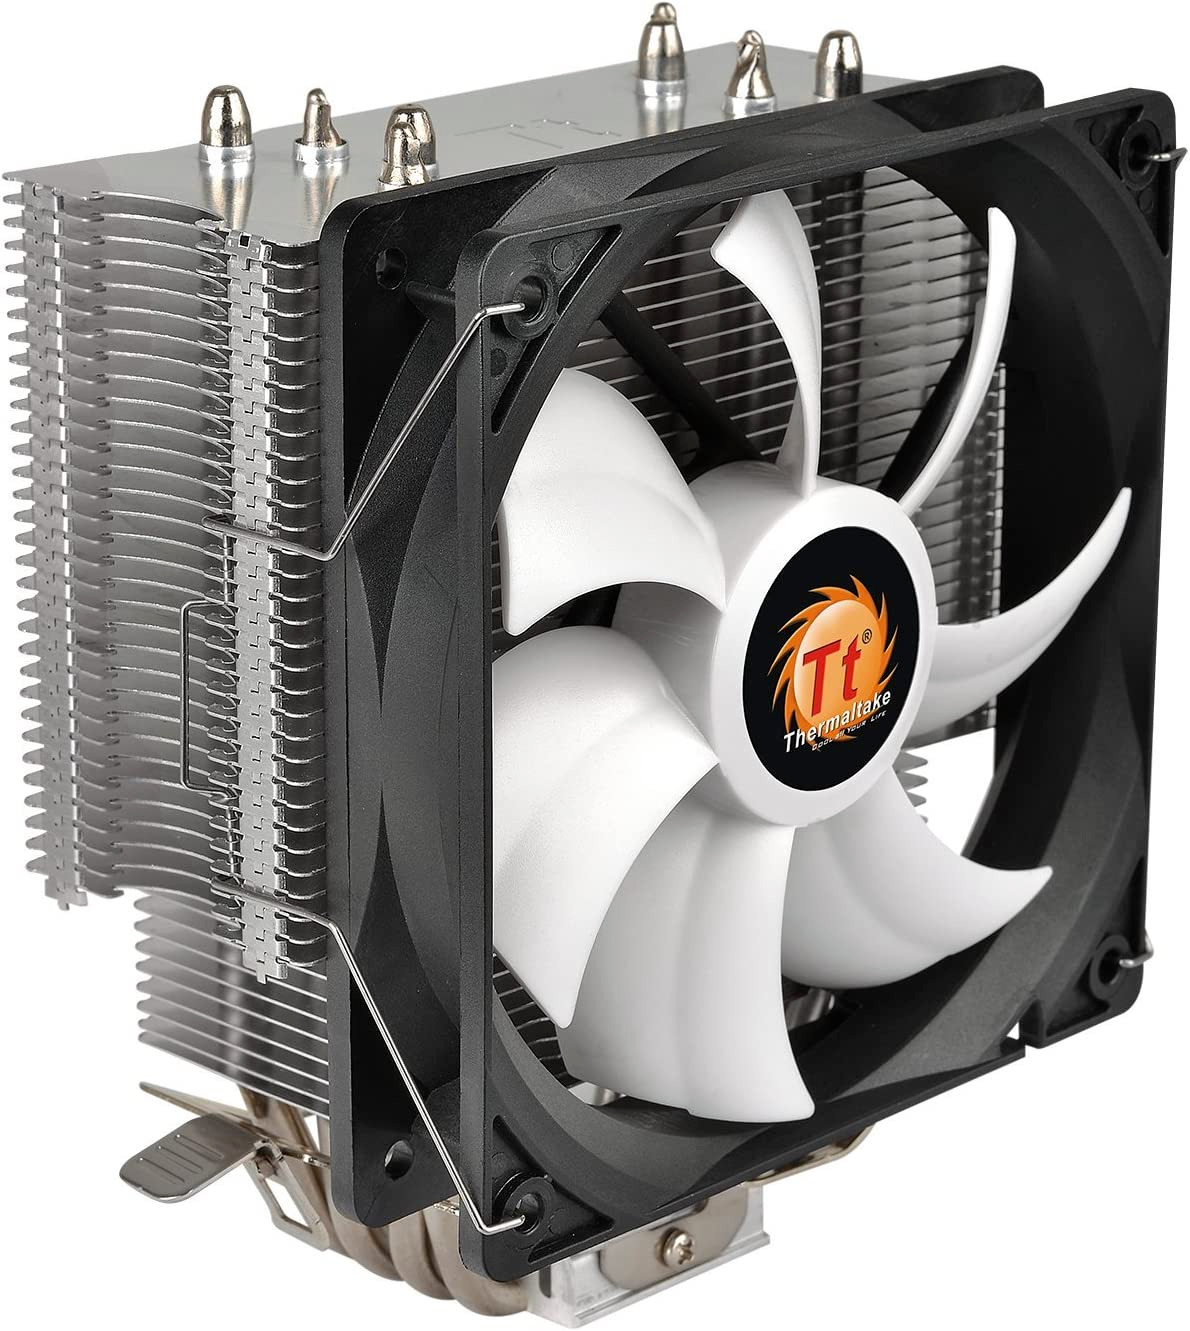 Thermaltake Contac Silent 12 150W INTEL/AMD (AM4) Support 120Mm PWM CPU Cooler C